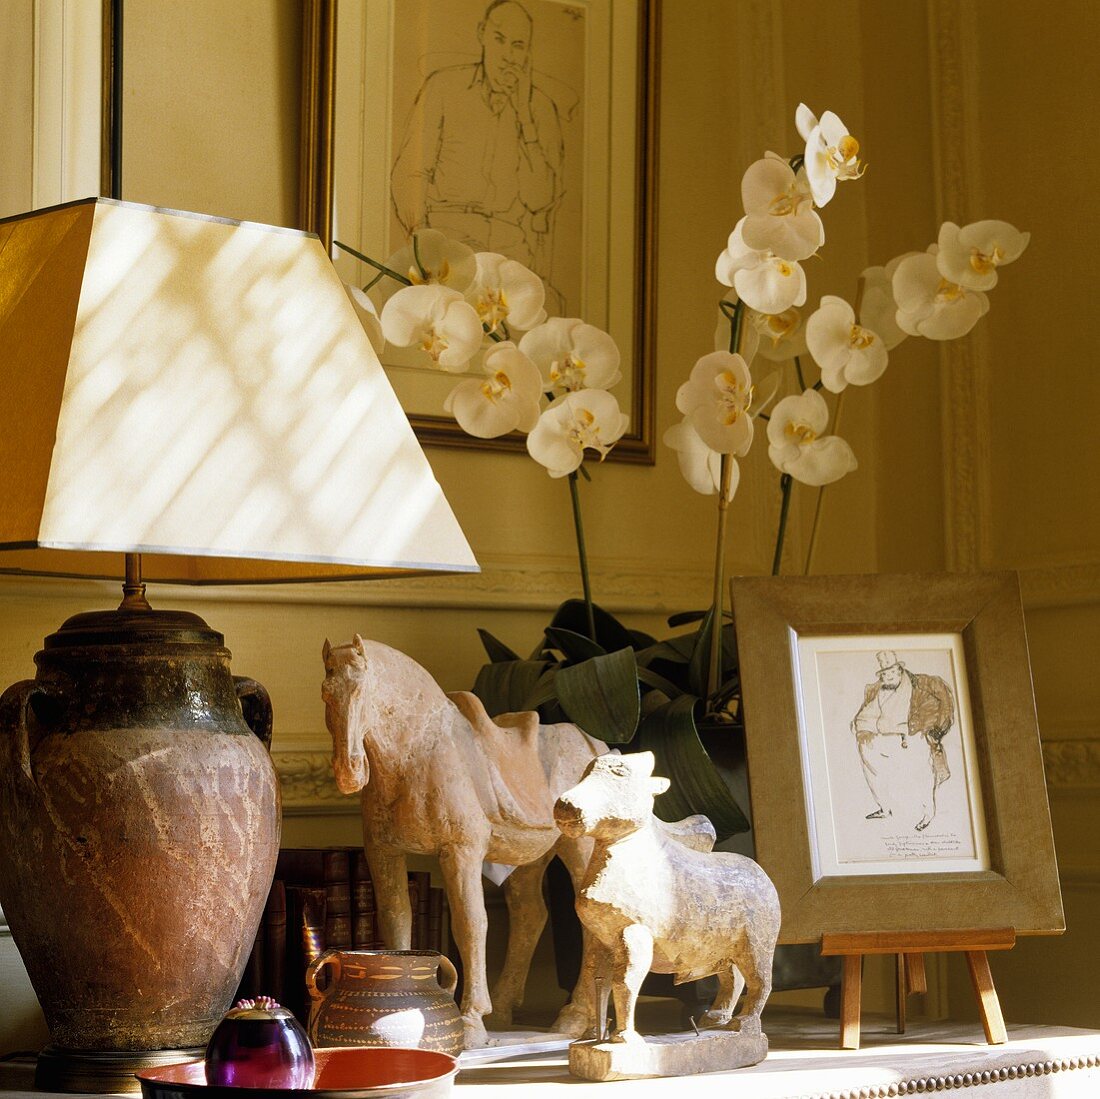 A table lamp with a white shade and stone animal figures on a shelf